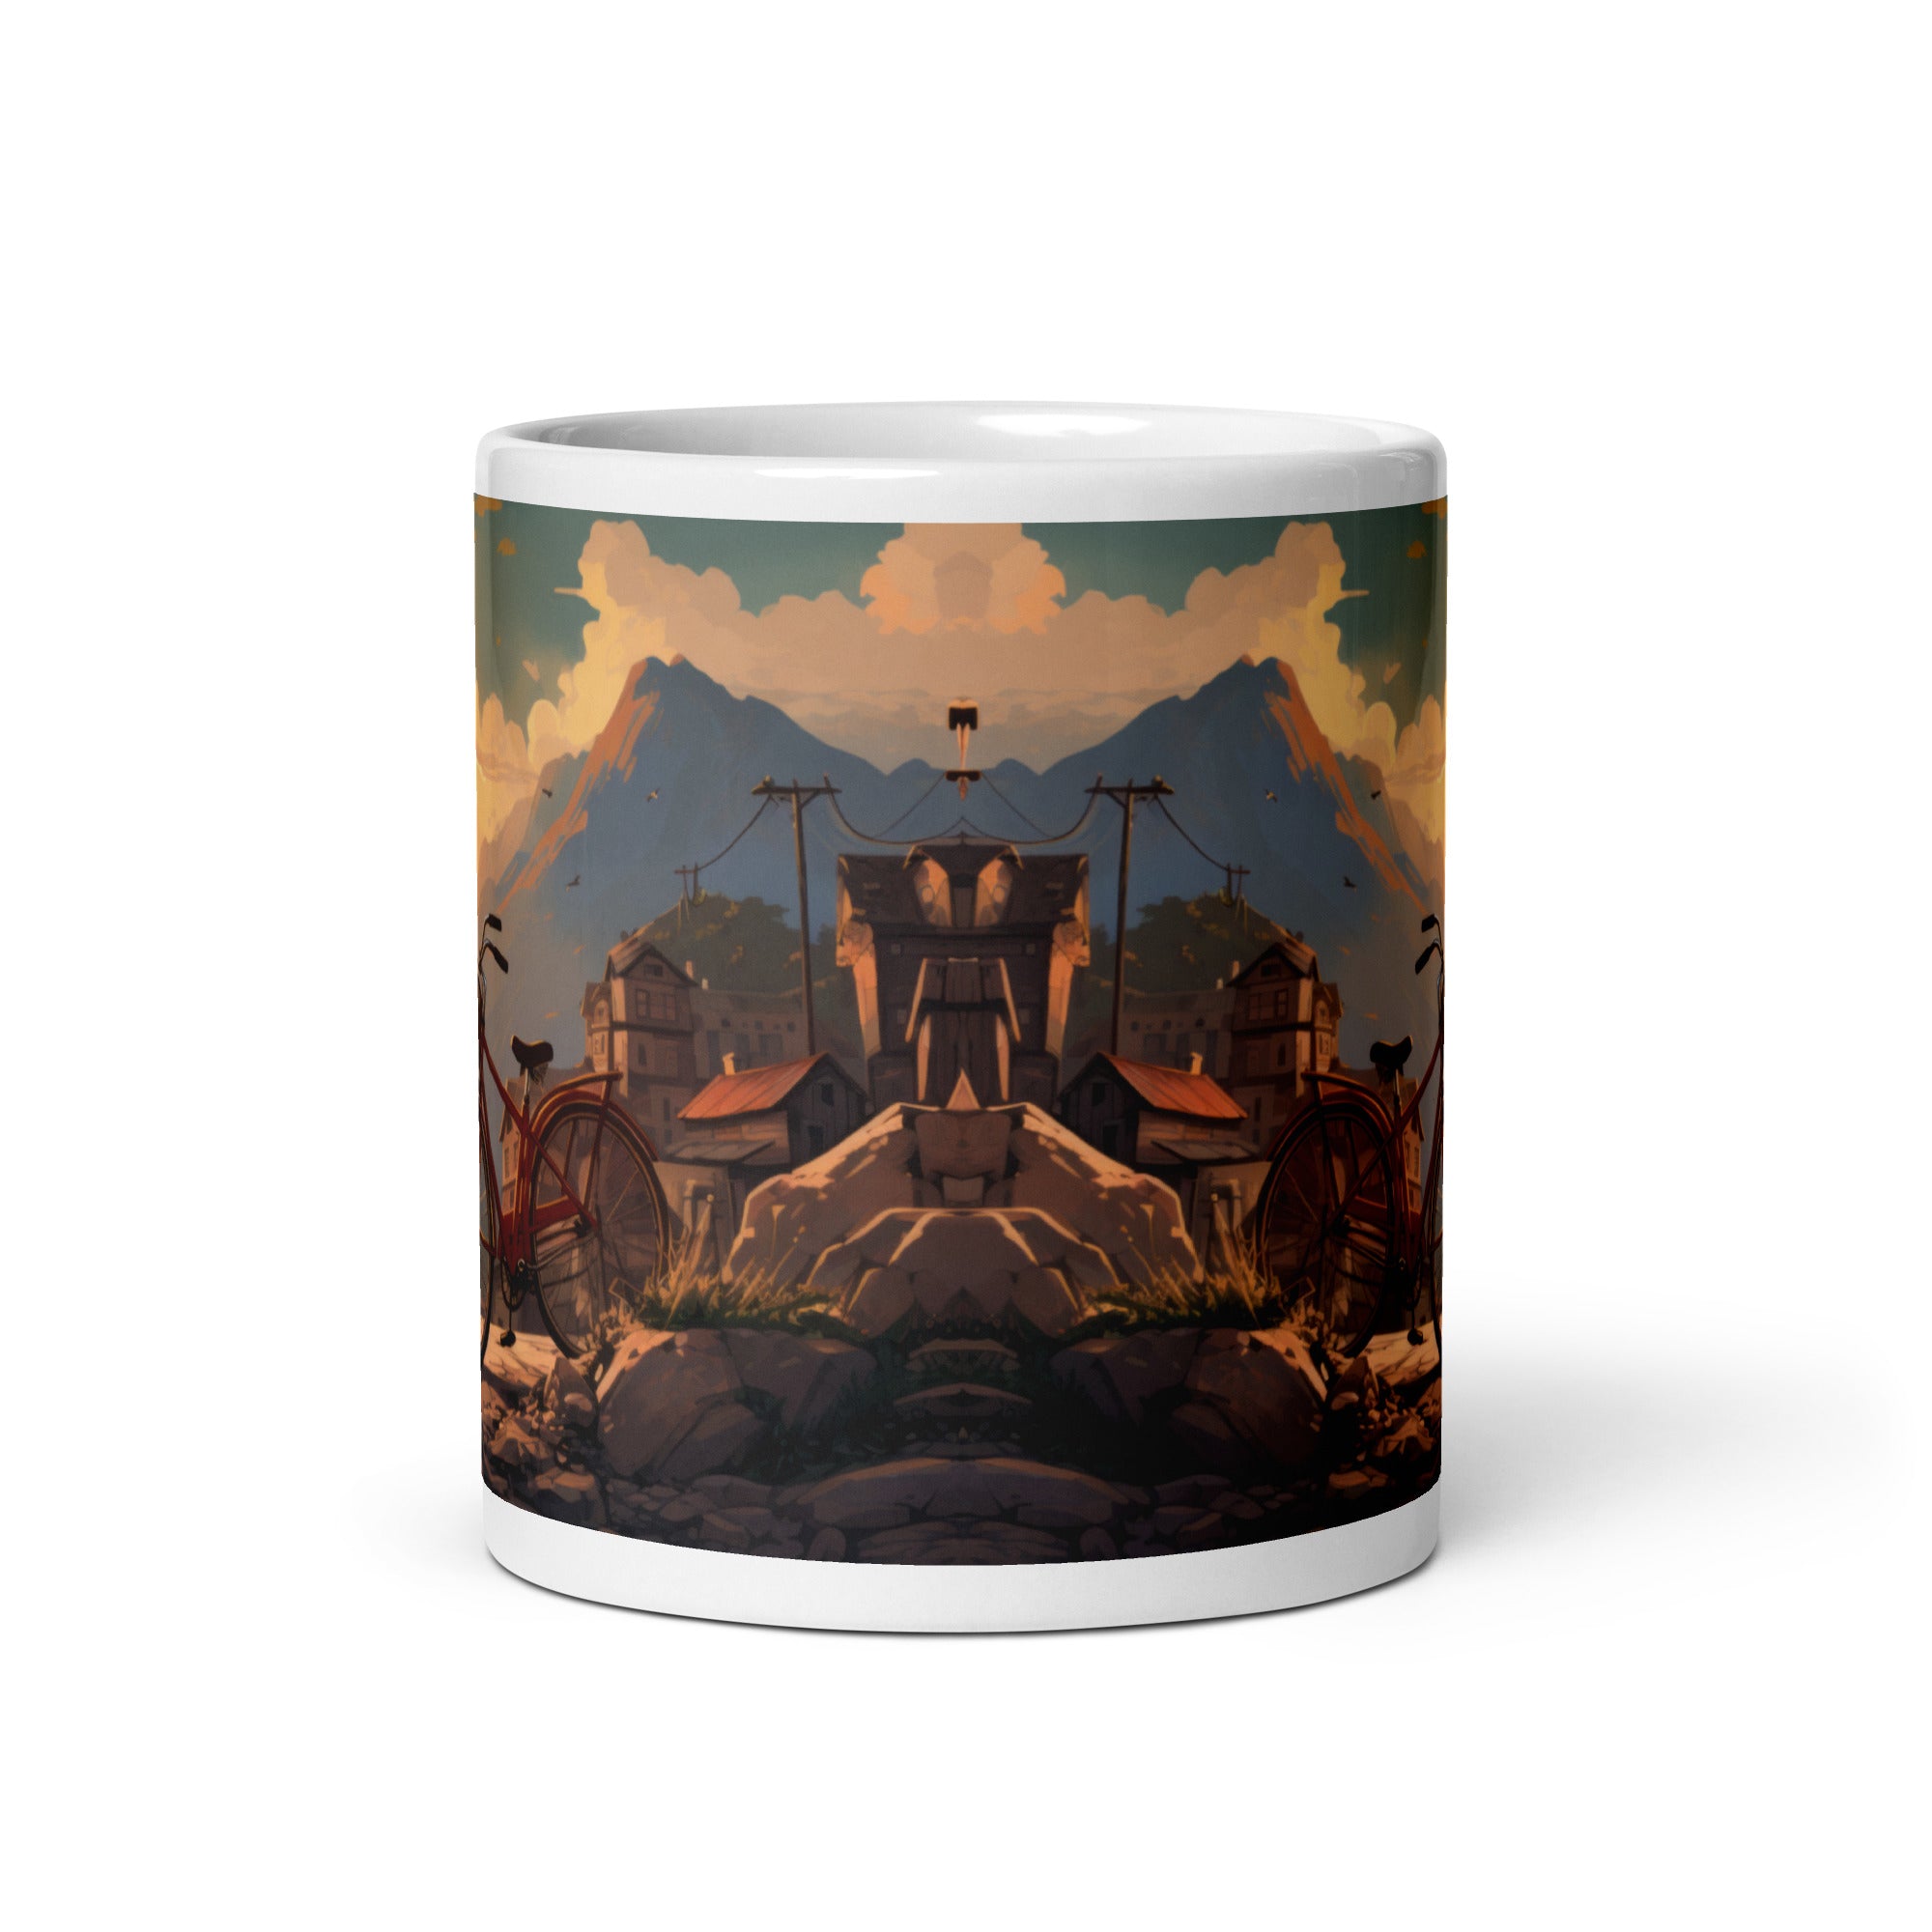 Town By The Mountains Cycling Mug